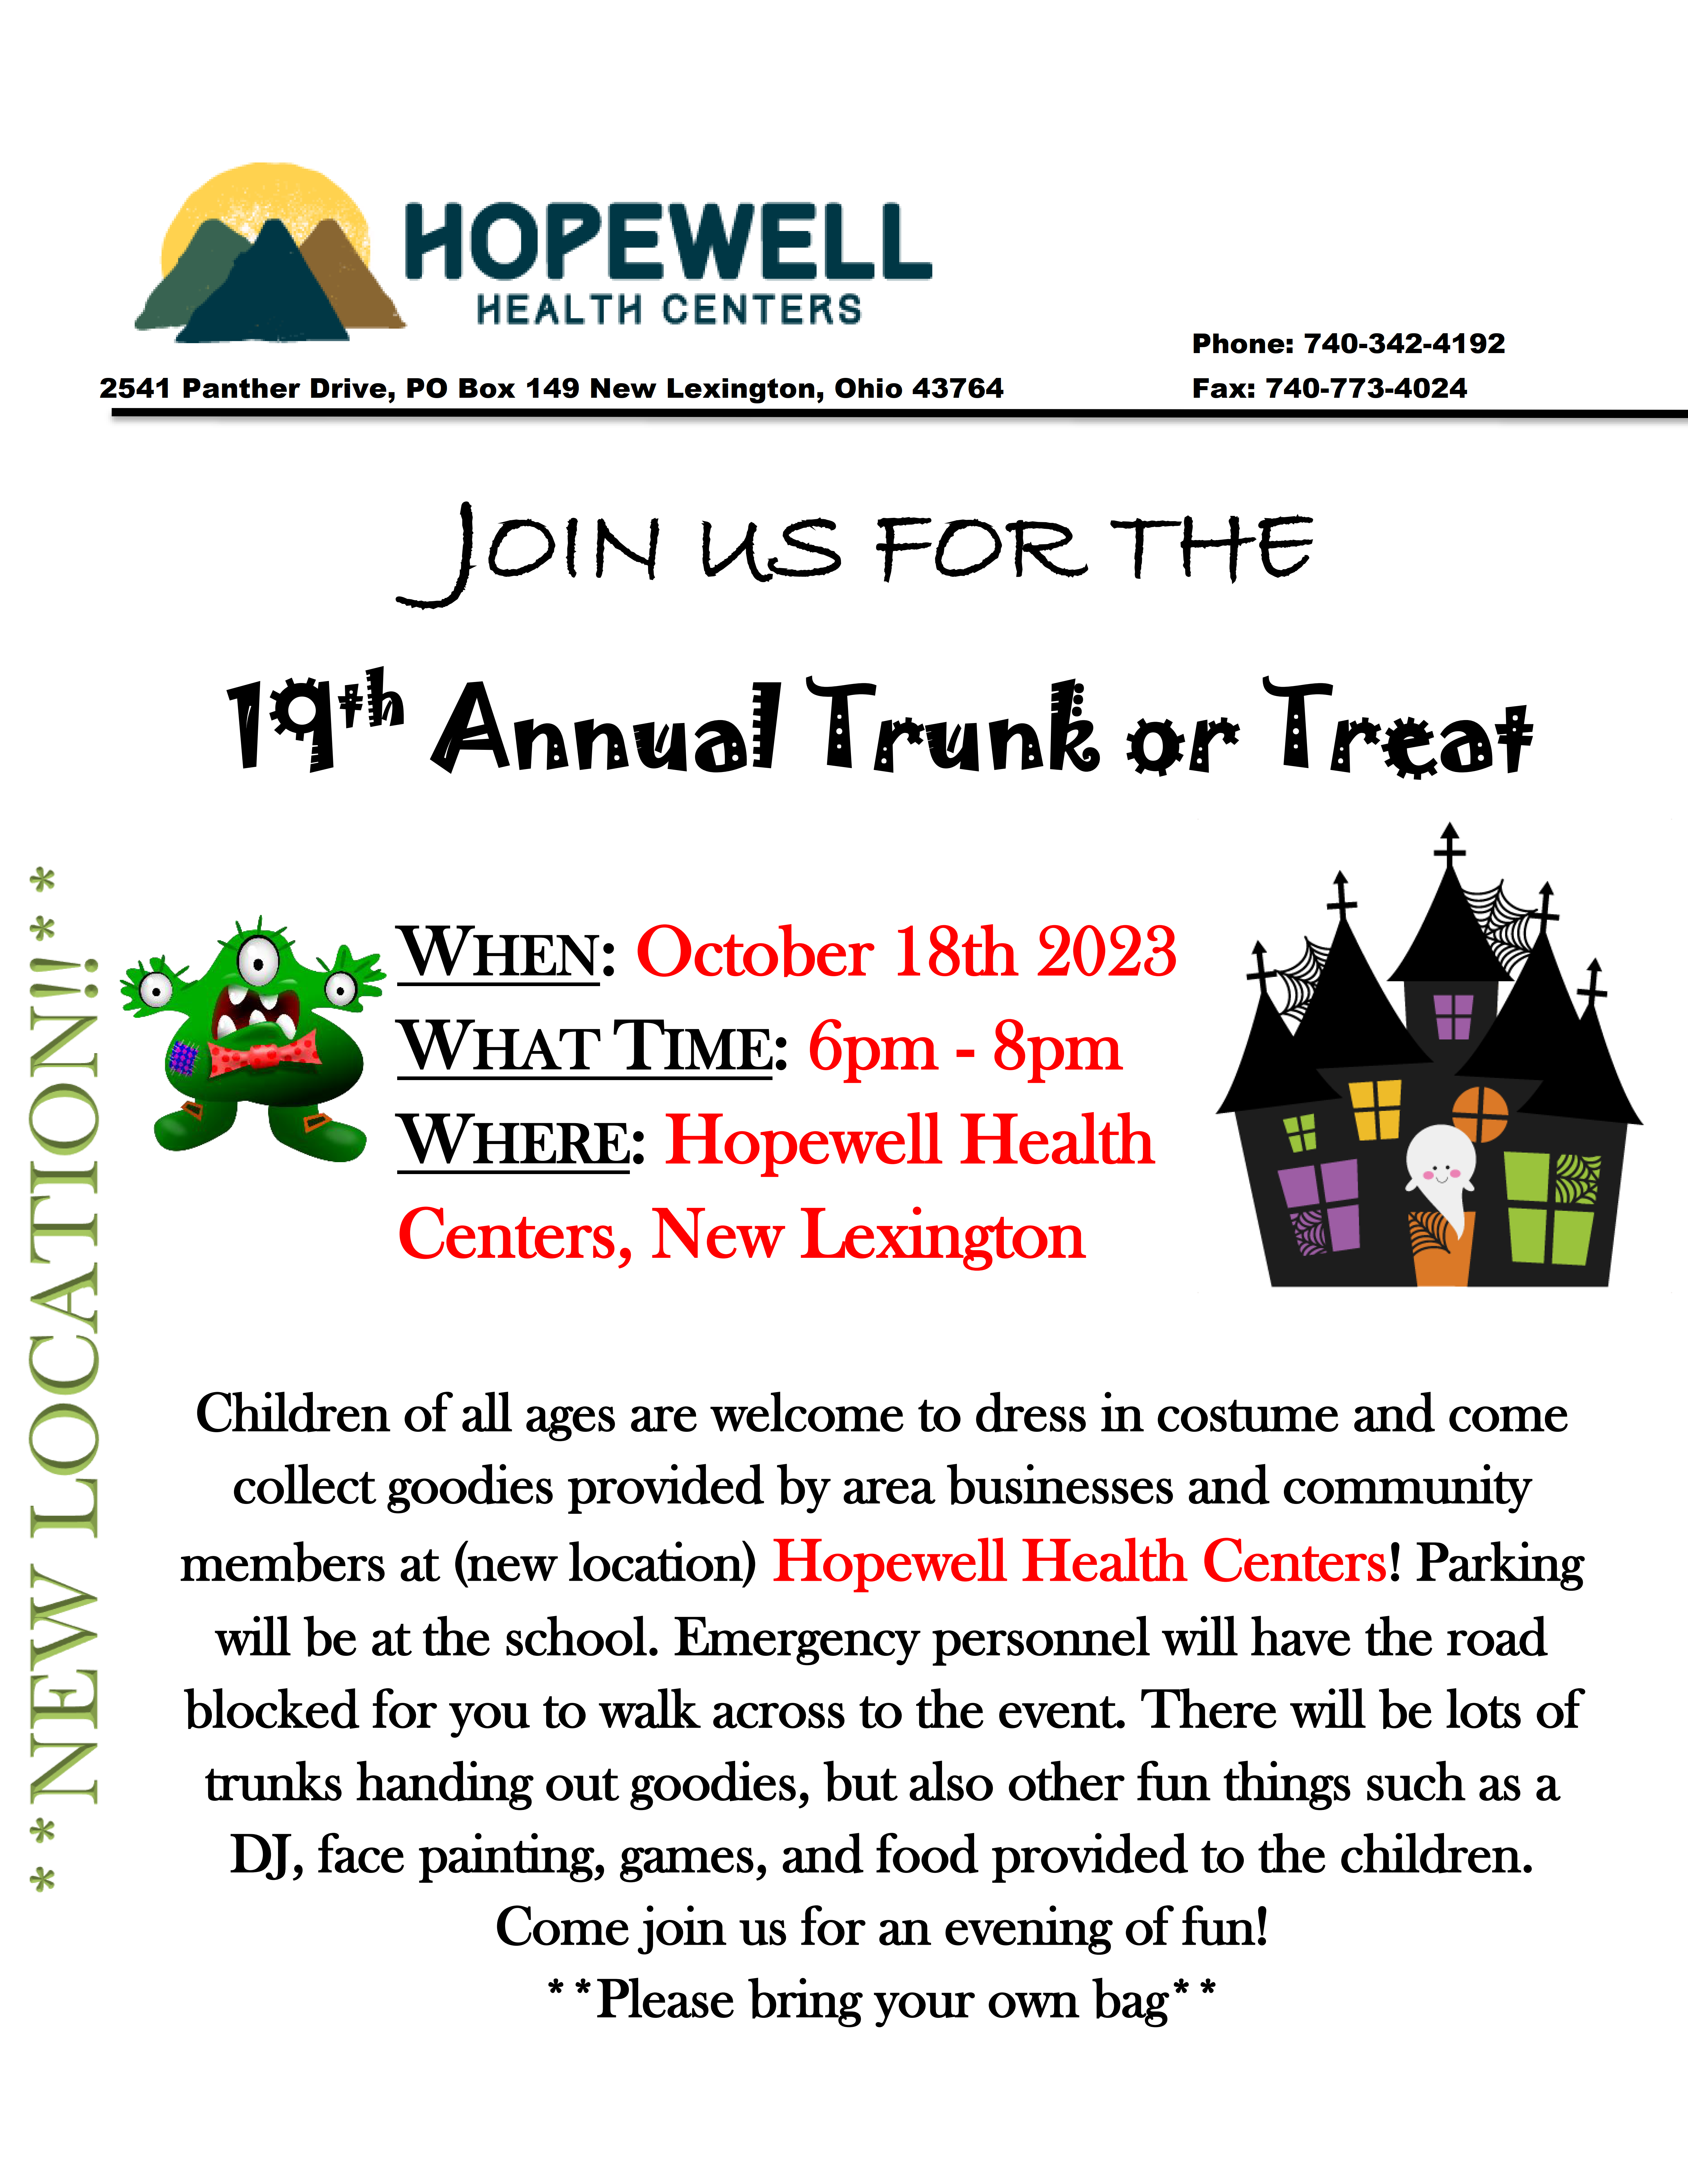 Trunk or Treat: Wednesday, October 25, 2023